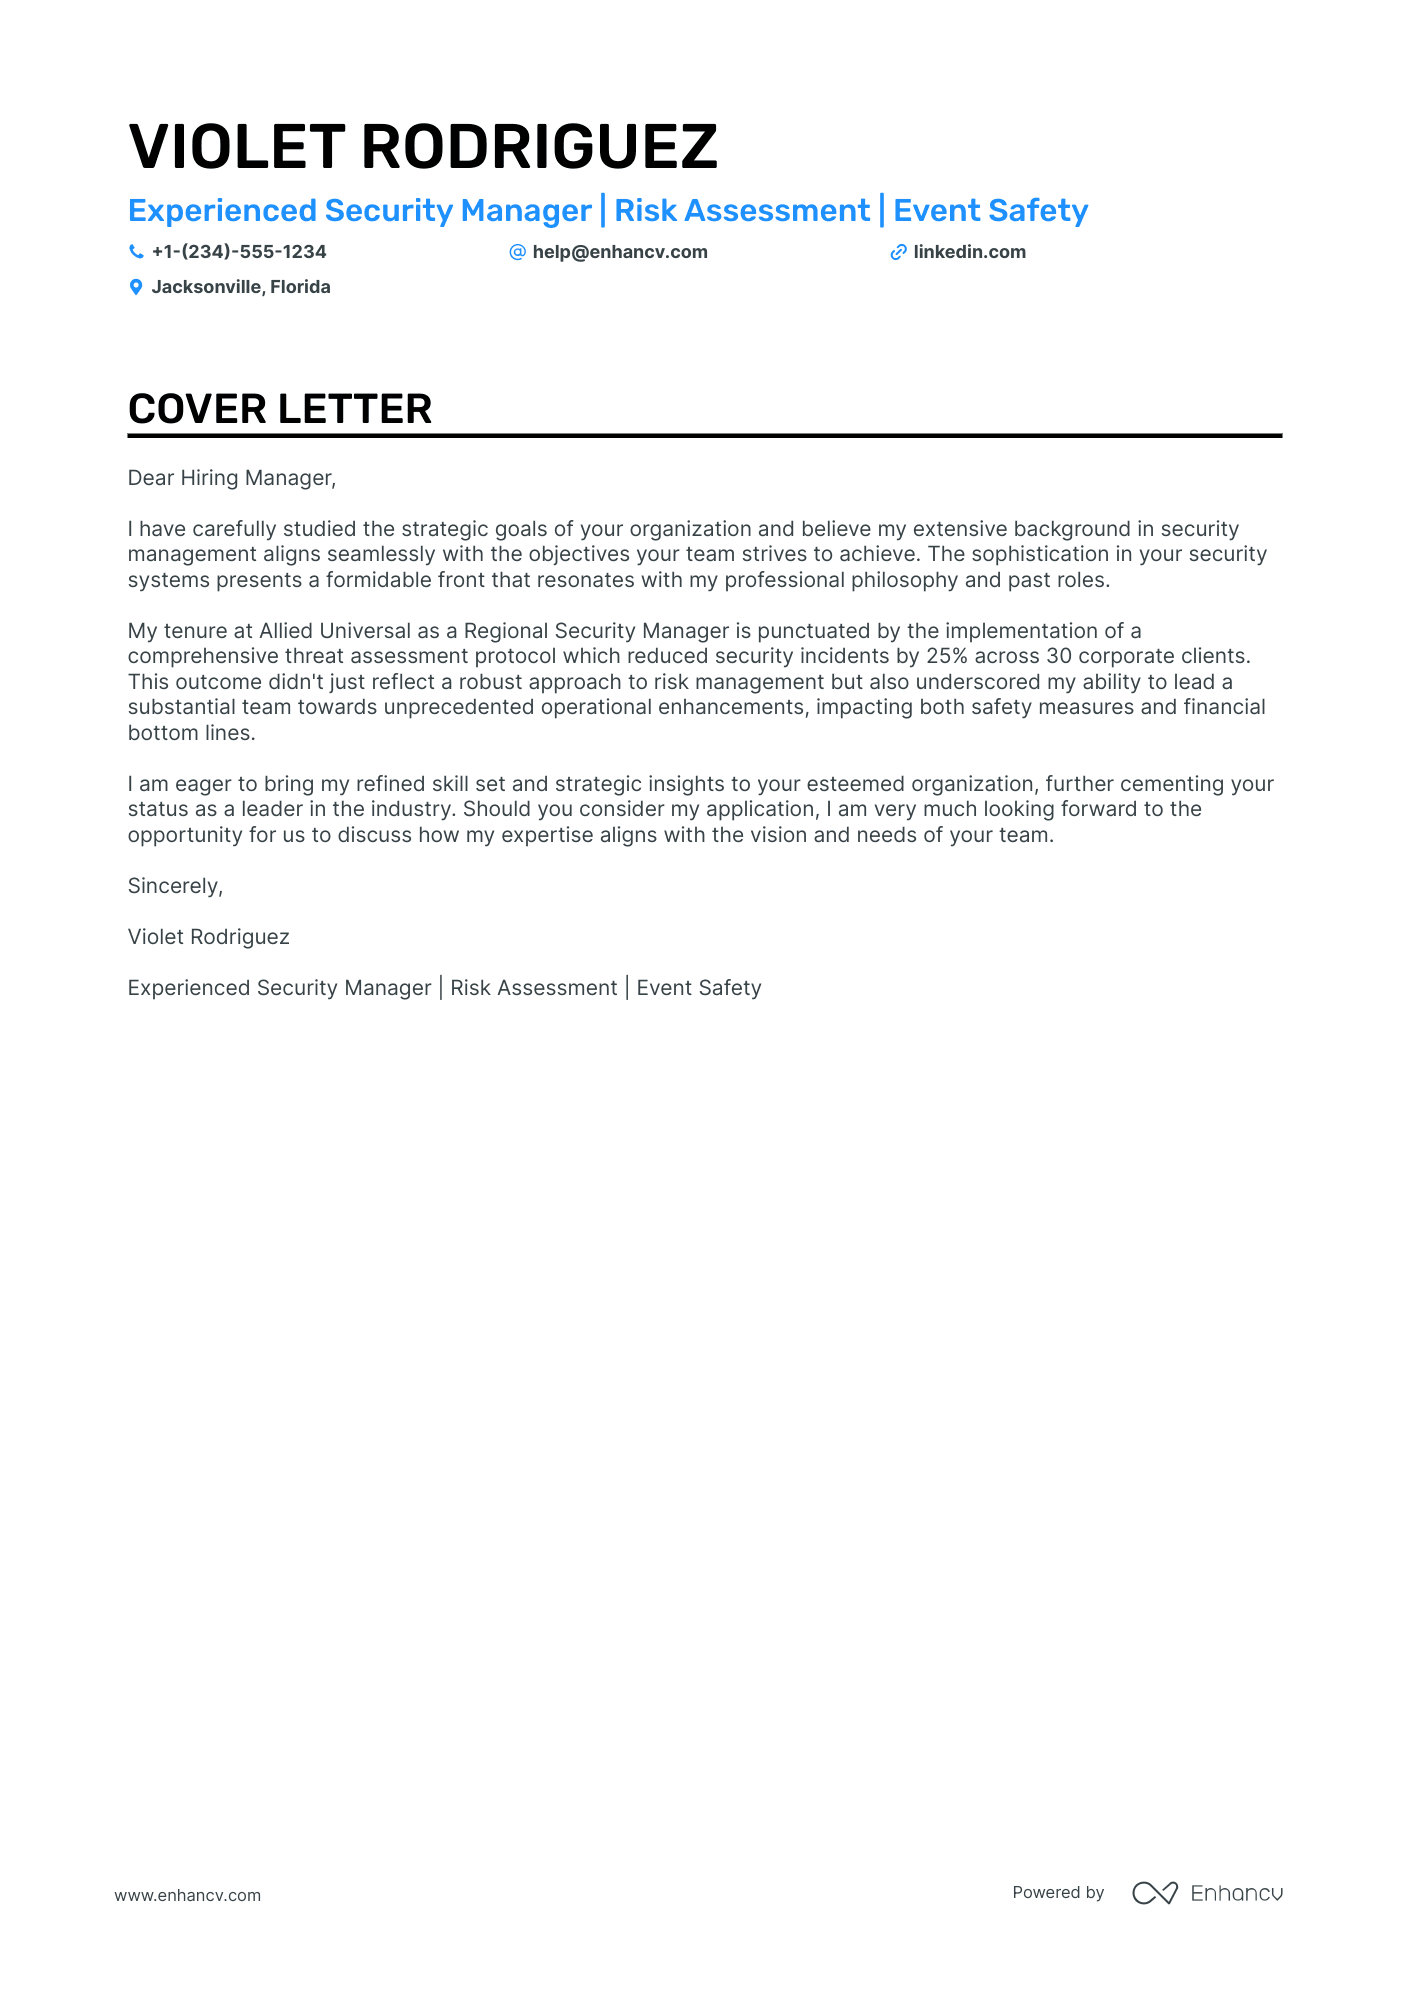 Security Director cover letter